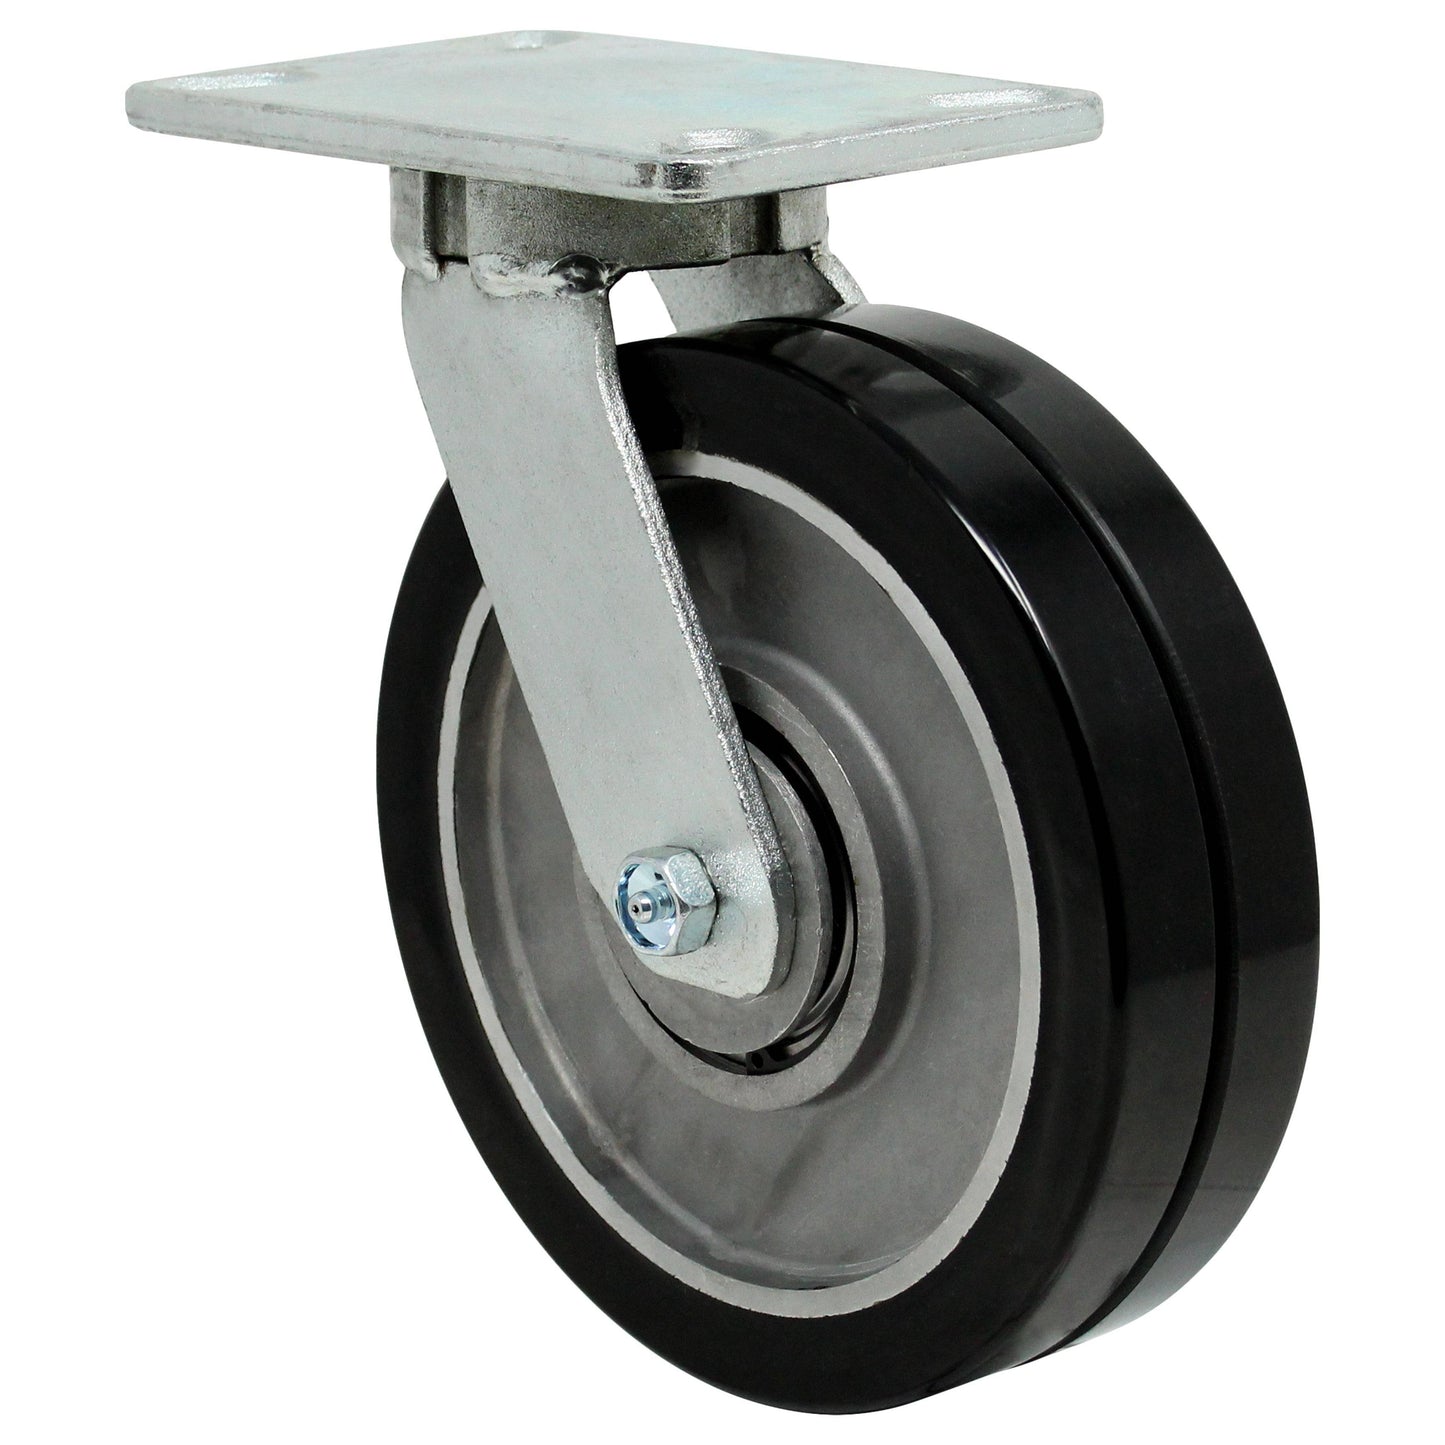 8" x 2" Dual Wheel Swivel Kingpinless Caster - 1400 lbs Capacity - Durable Superior Casters